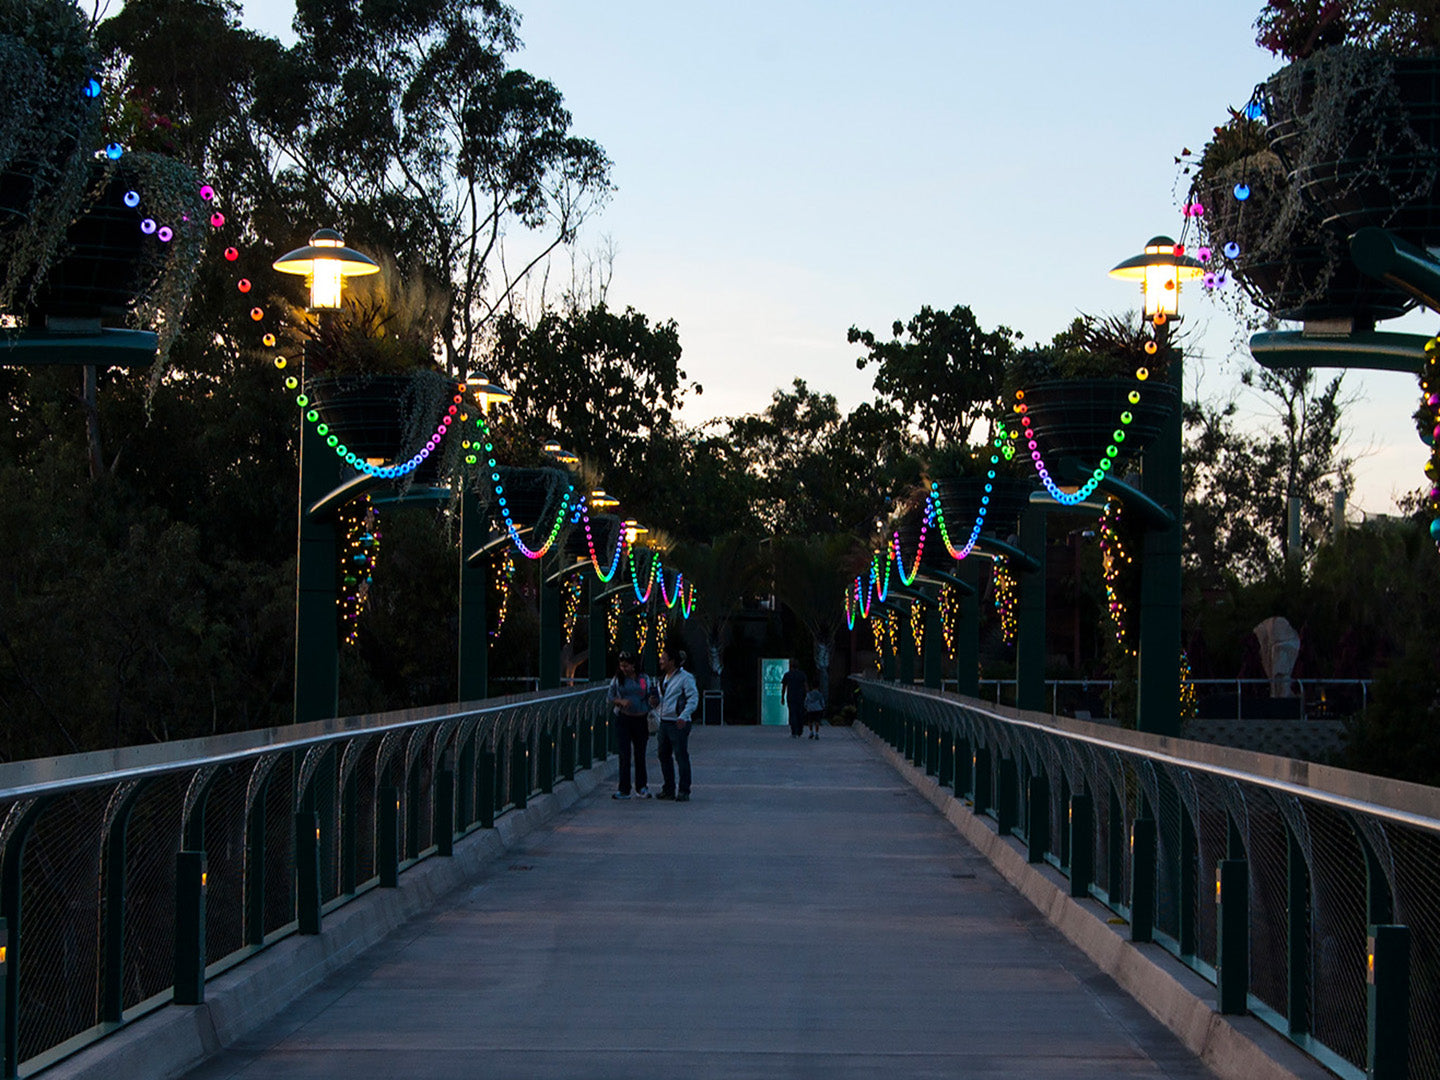 A bridge is decorated with one strand of rainbow lights draped on both sides of the walkway.